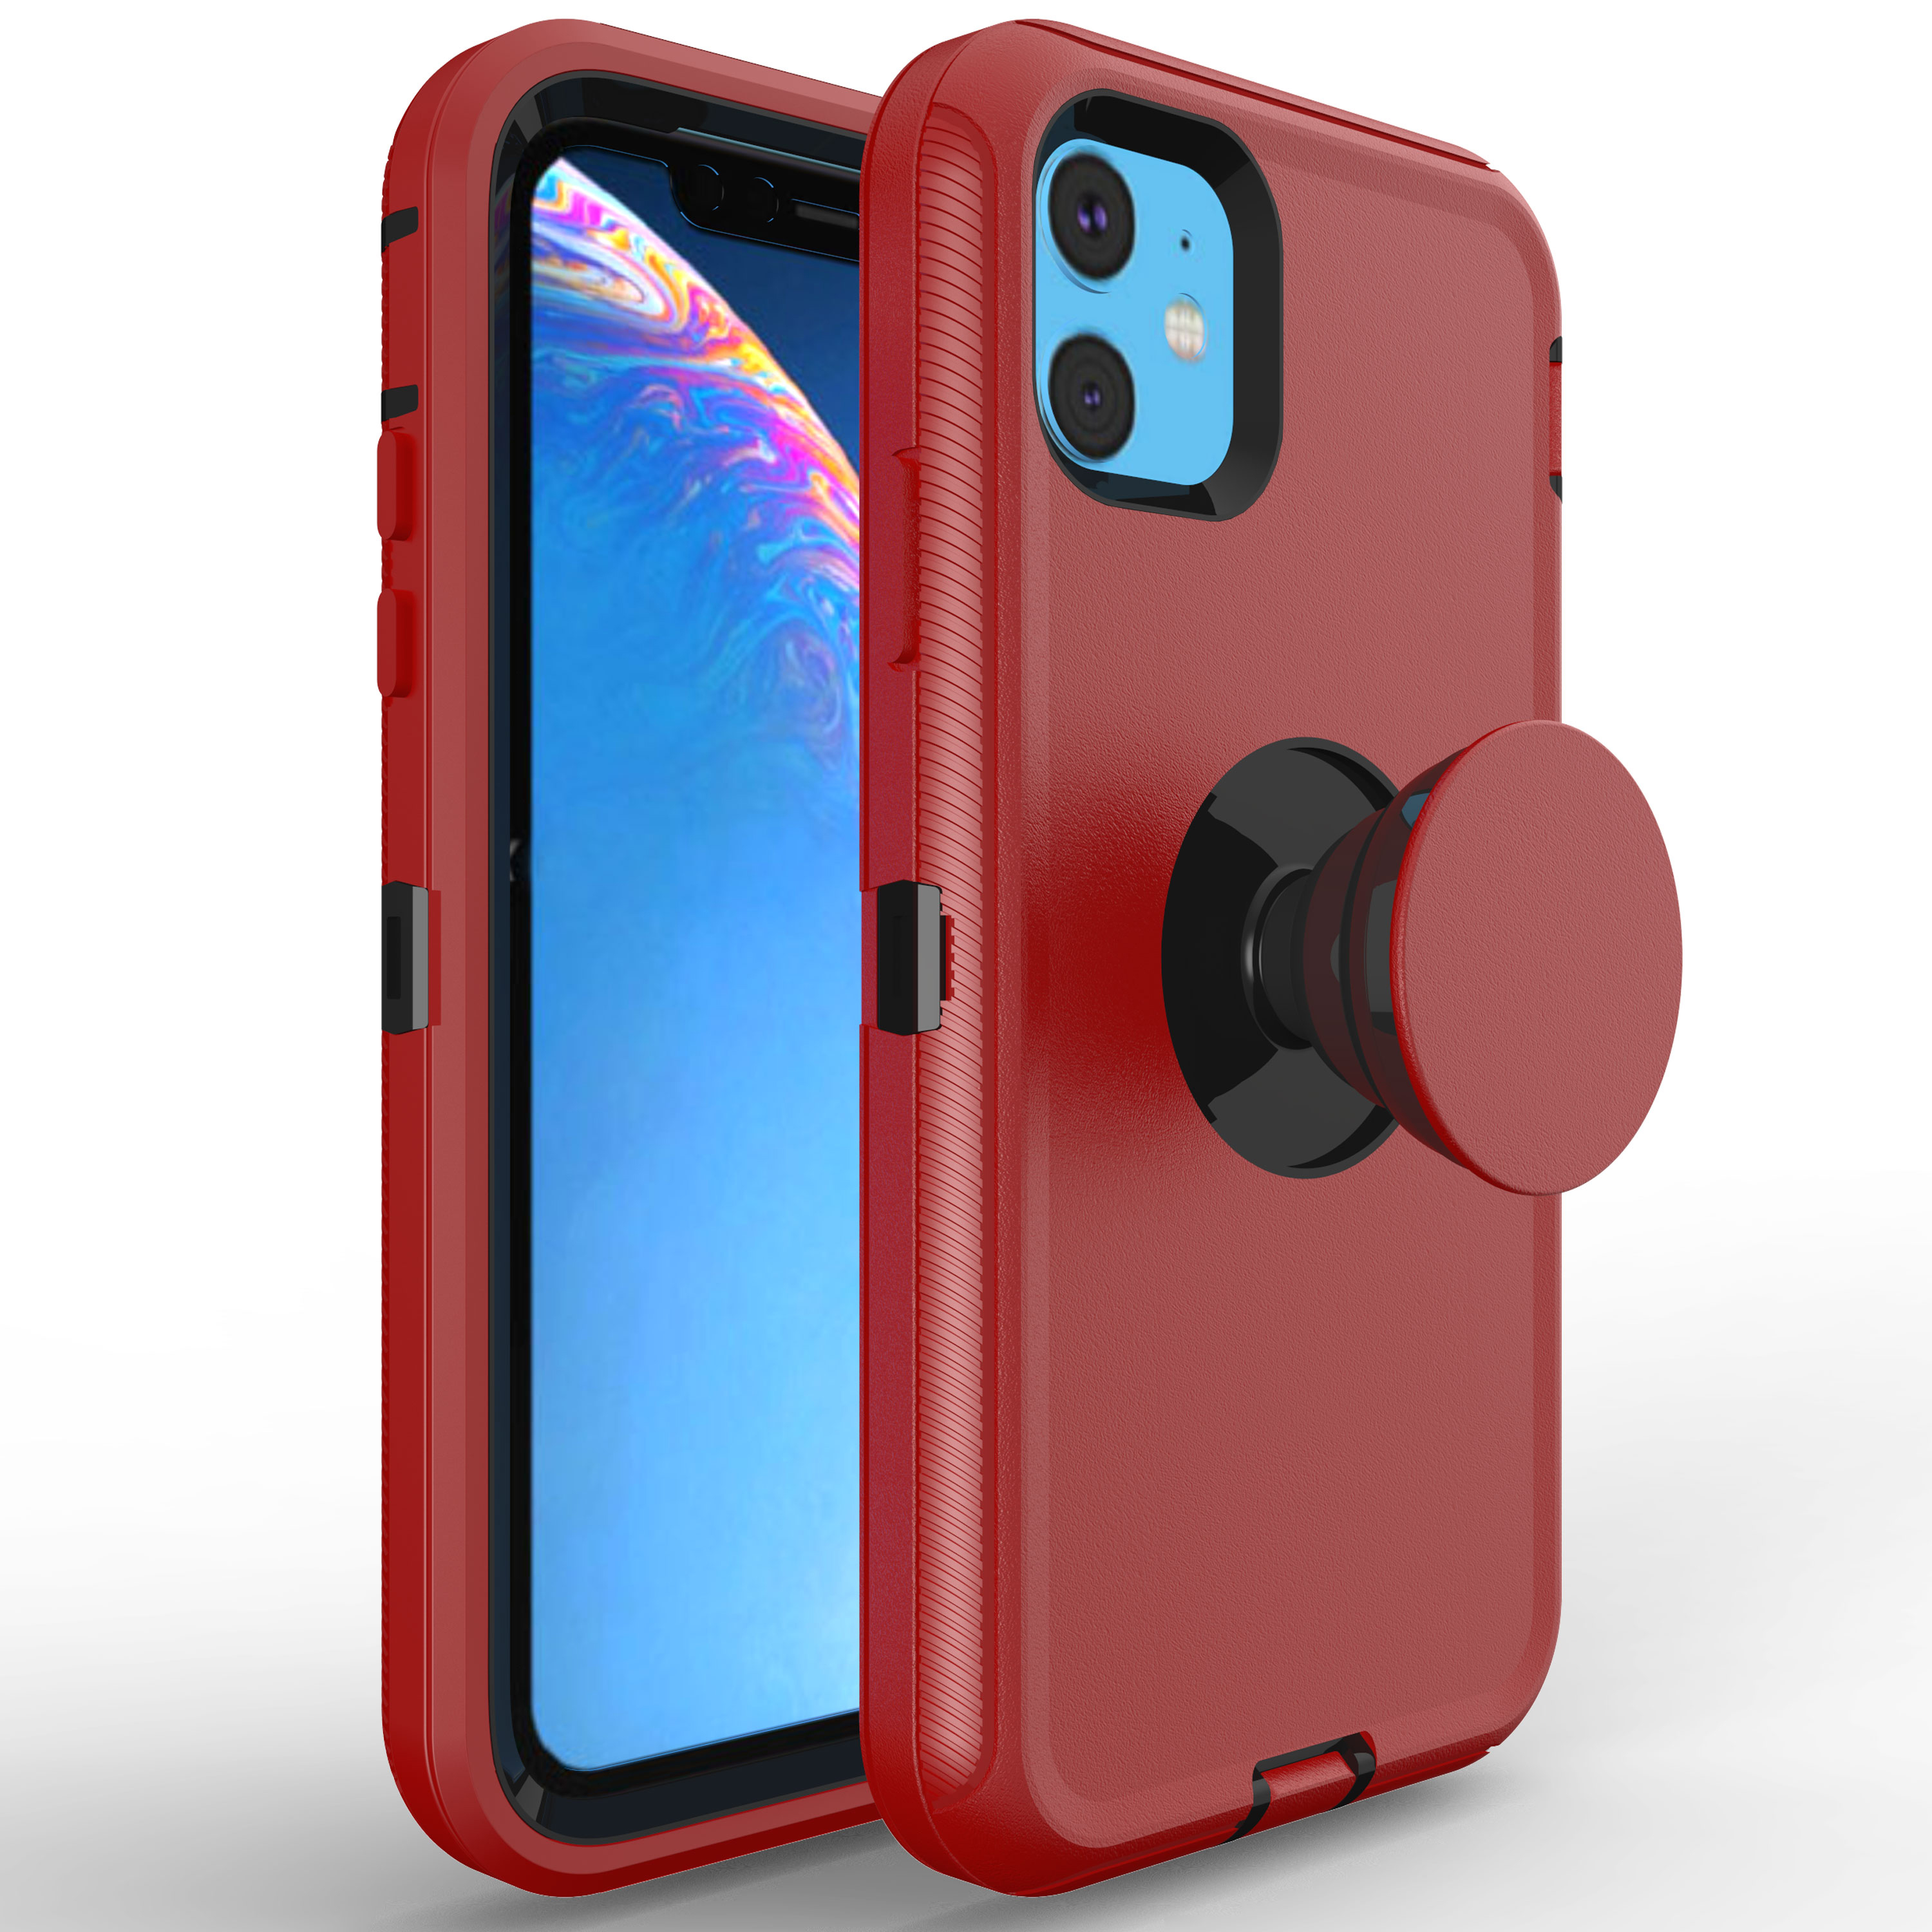 iPHONE 11 Pro (5.8in) Pop Up Grip Armor Robot Case (Red Black)